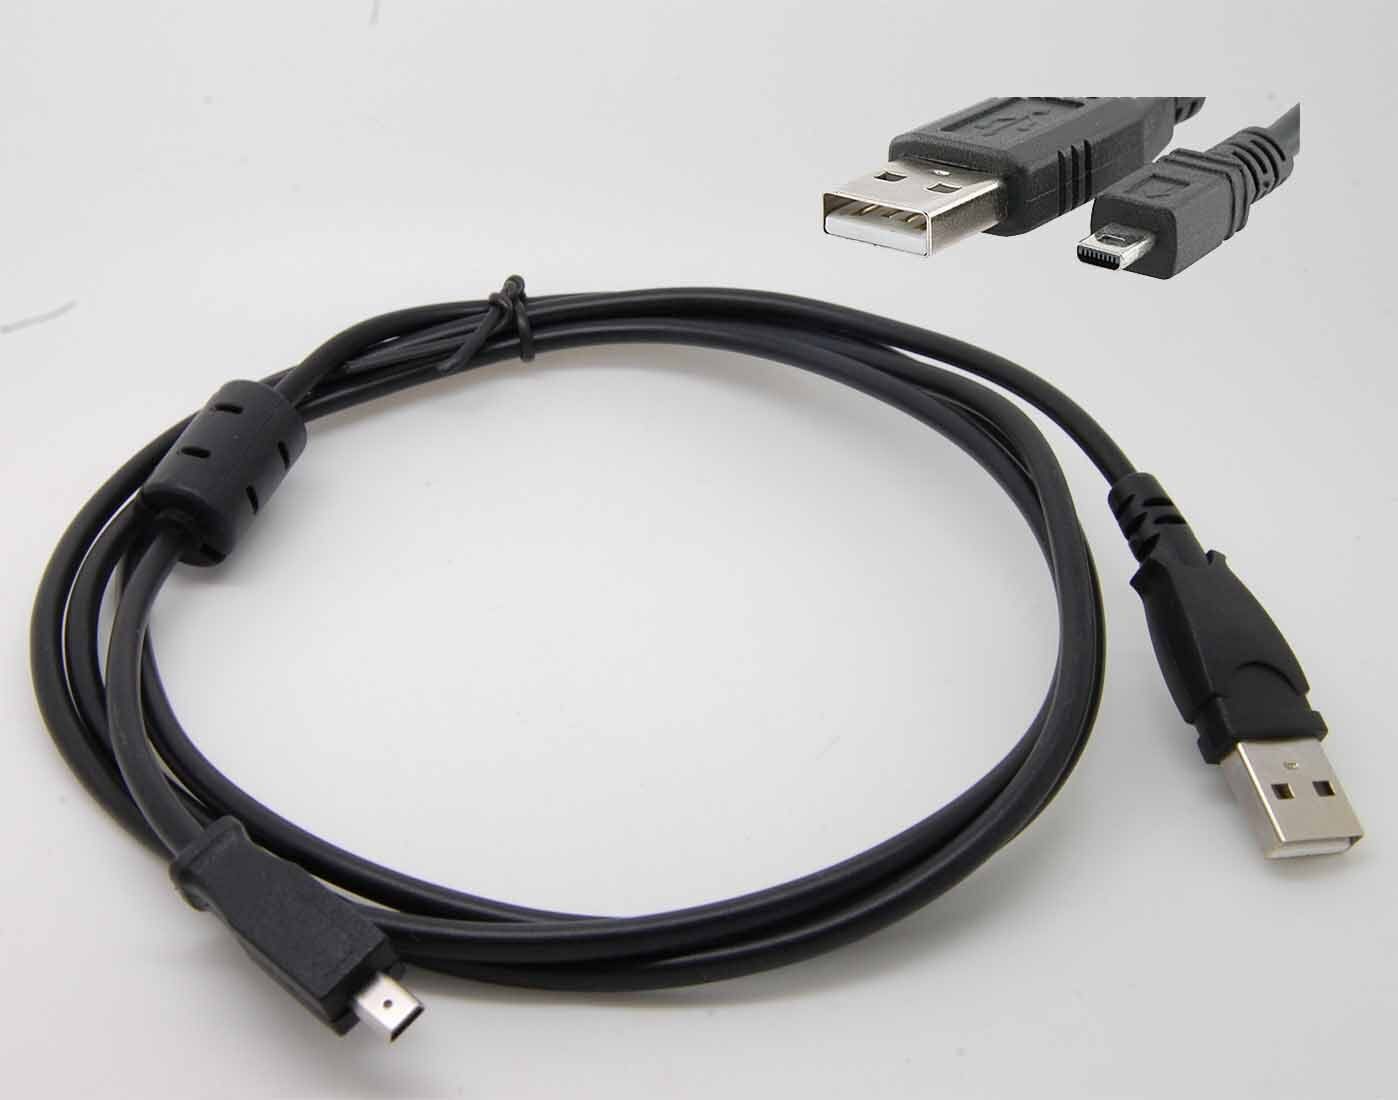 USB SYNC DATA CABLE FOR KODAK EASYSHARE-ONE Cameras 4 MP 6 MP M1033 M1063 M1073